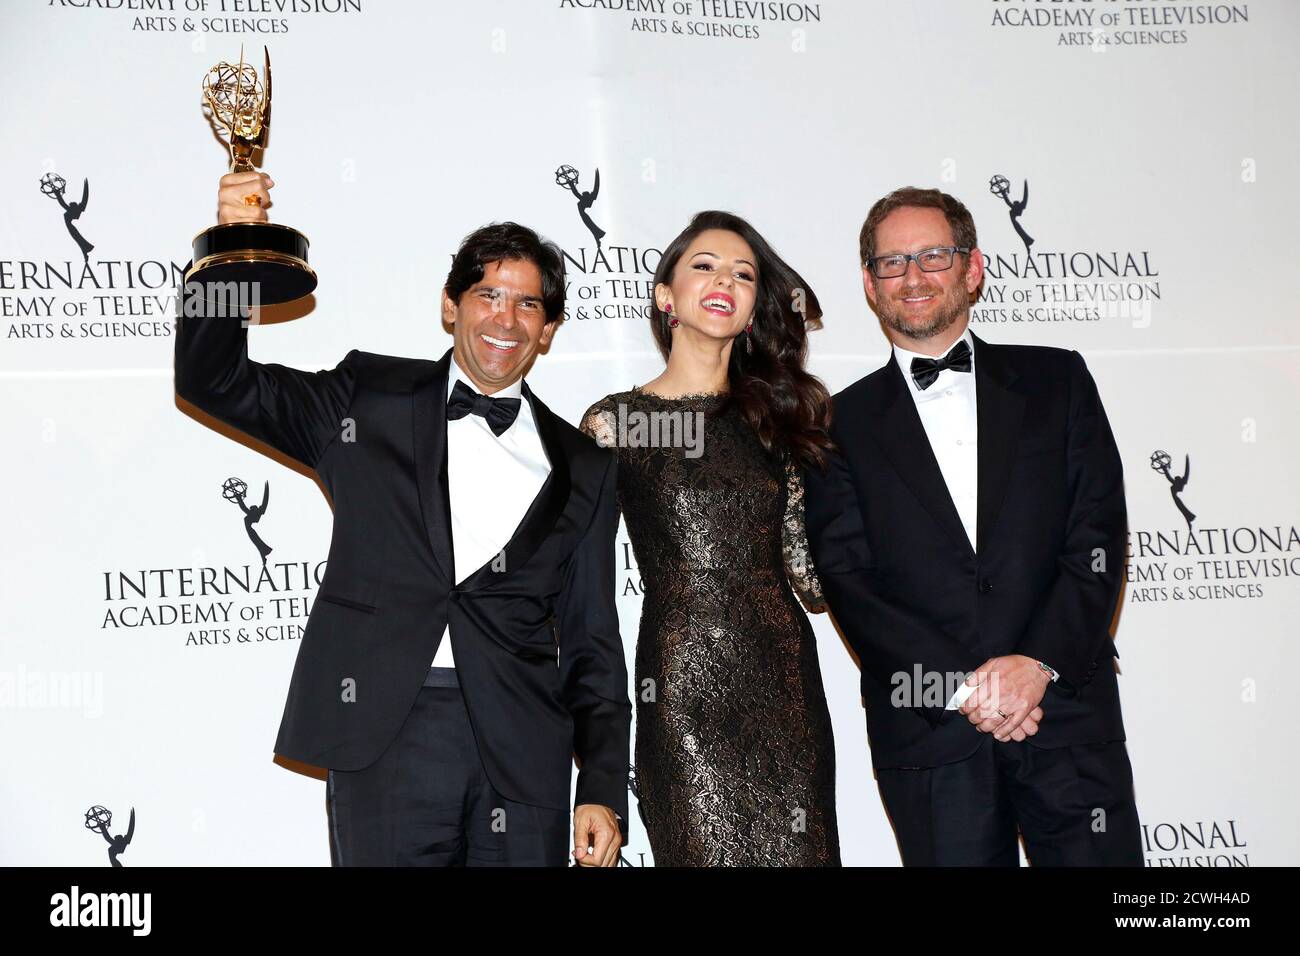 President of Production Worldwide Distribution Division Marcos Santana and EVP Scripted Programming and General Manager at Telemundo Joshua Mintz (R) pose backstage with their Non-English Language US Primetime award for for 'El Senor de los Cielos', with presenter Annet Mahendru at the 42nd International Emmy Awards in New York November 24, 2014. REUTERS/Andrew Kelly (UNITED STATES - Tags: ENTERTAINMENT) Stock Photo